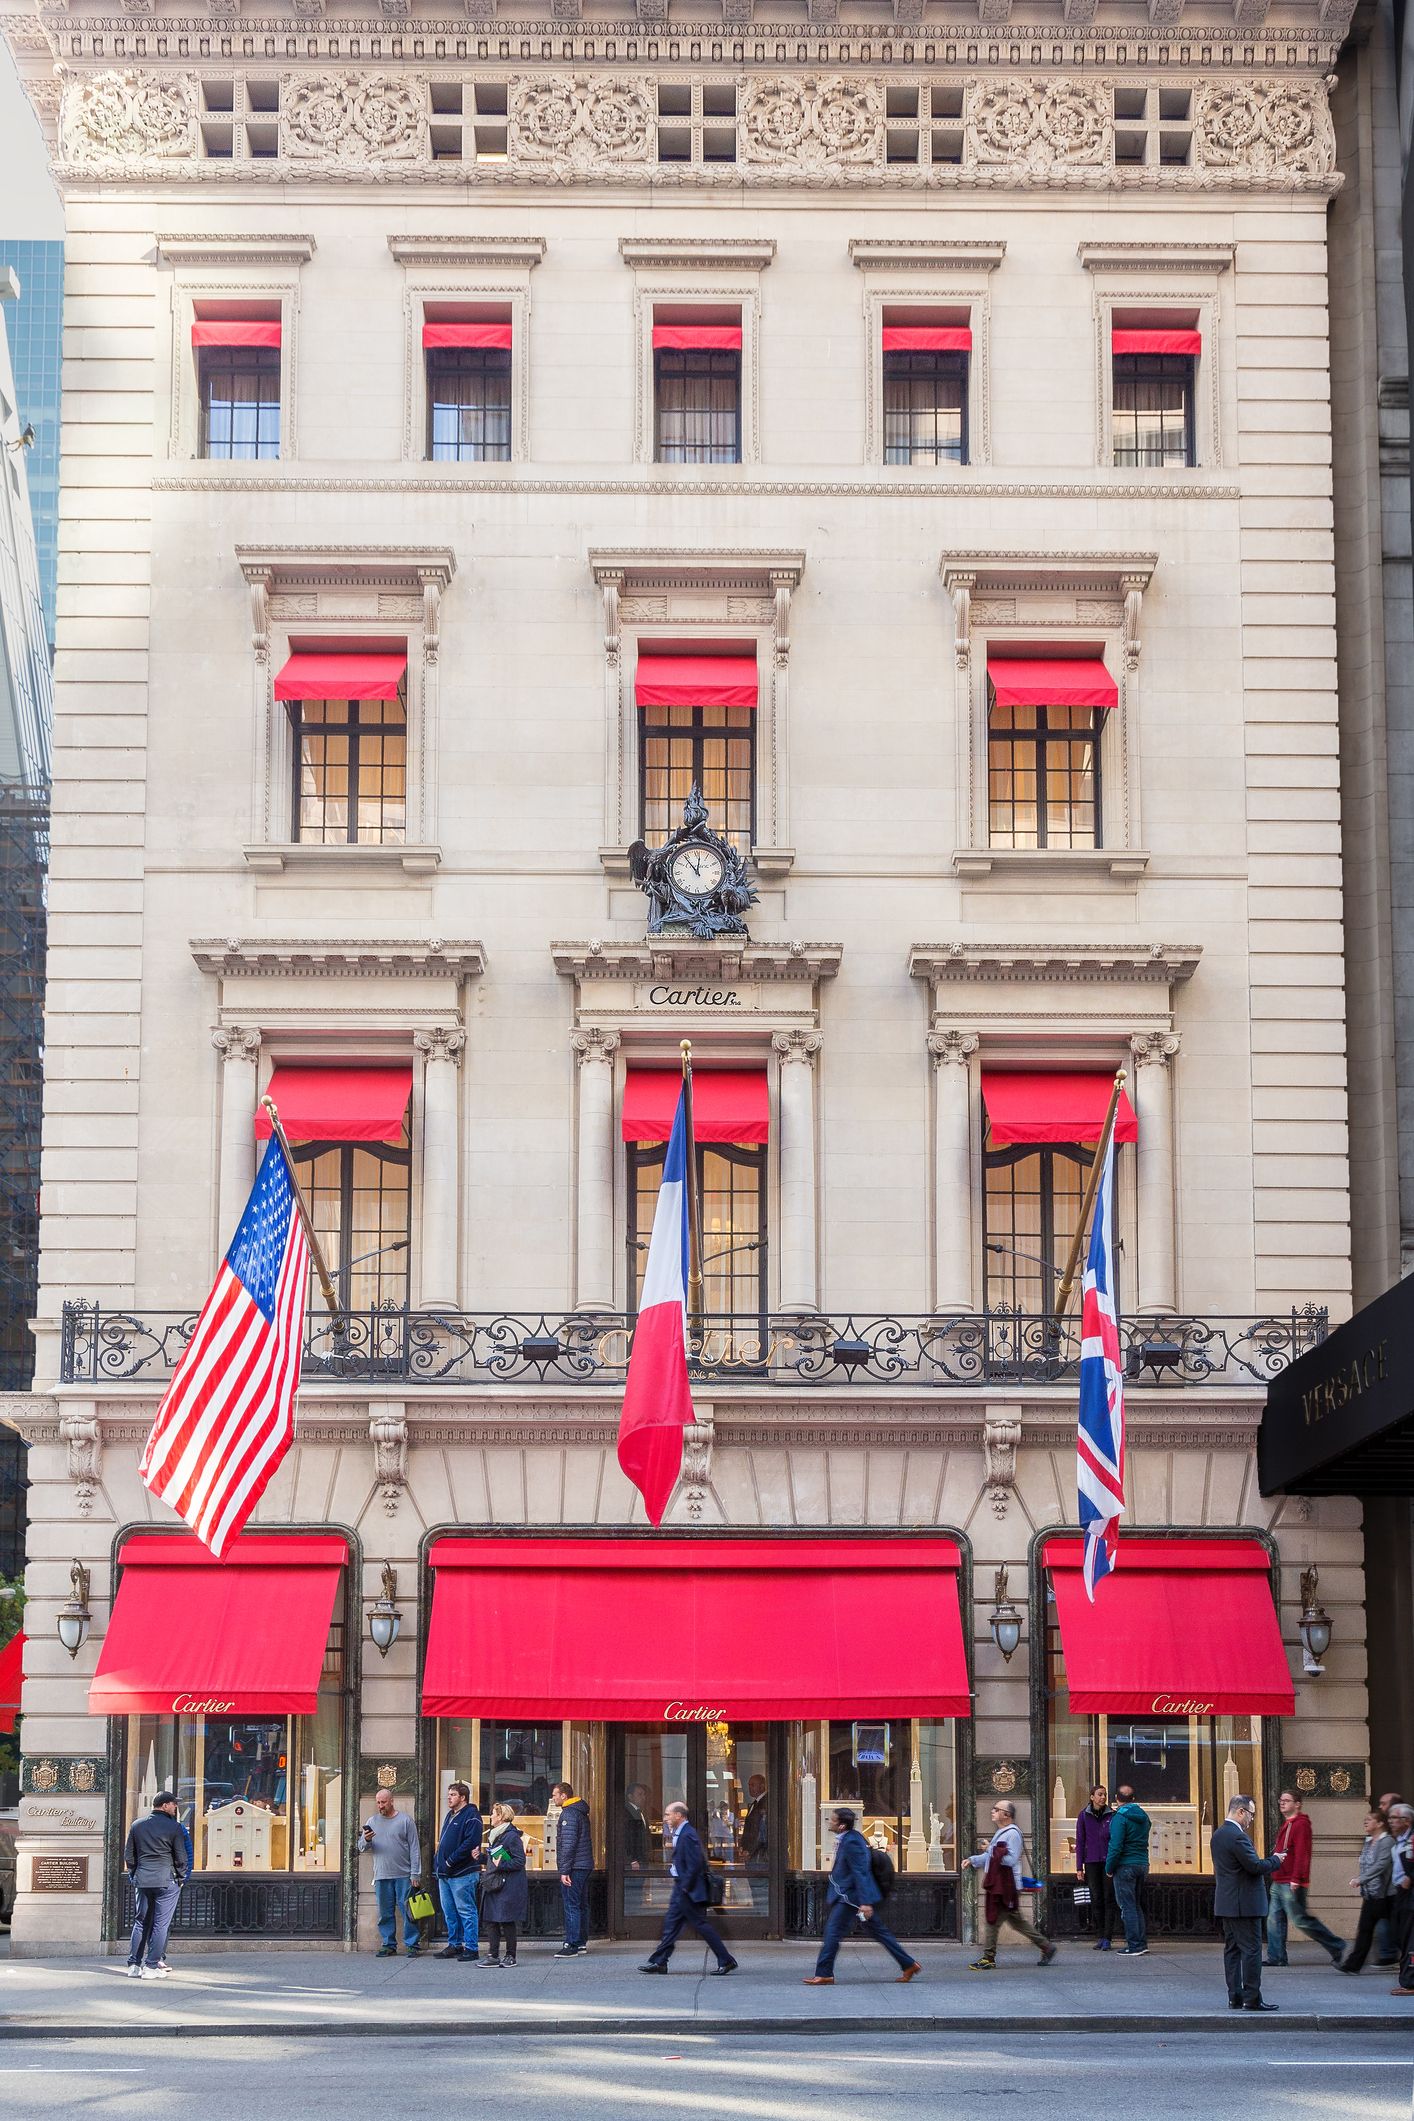 The story behind the historic Cartier Fifth Avenue mansion